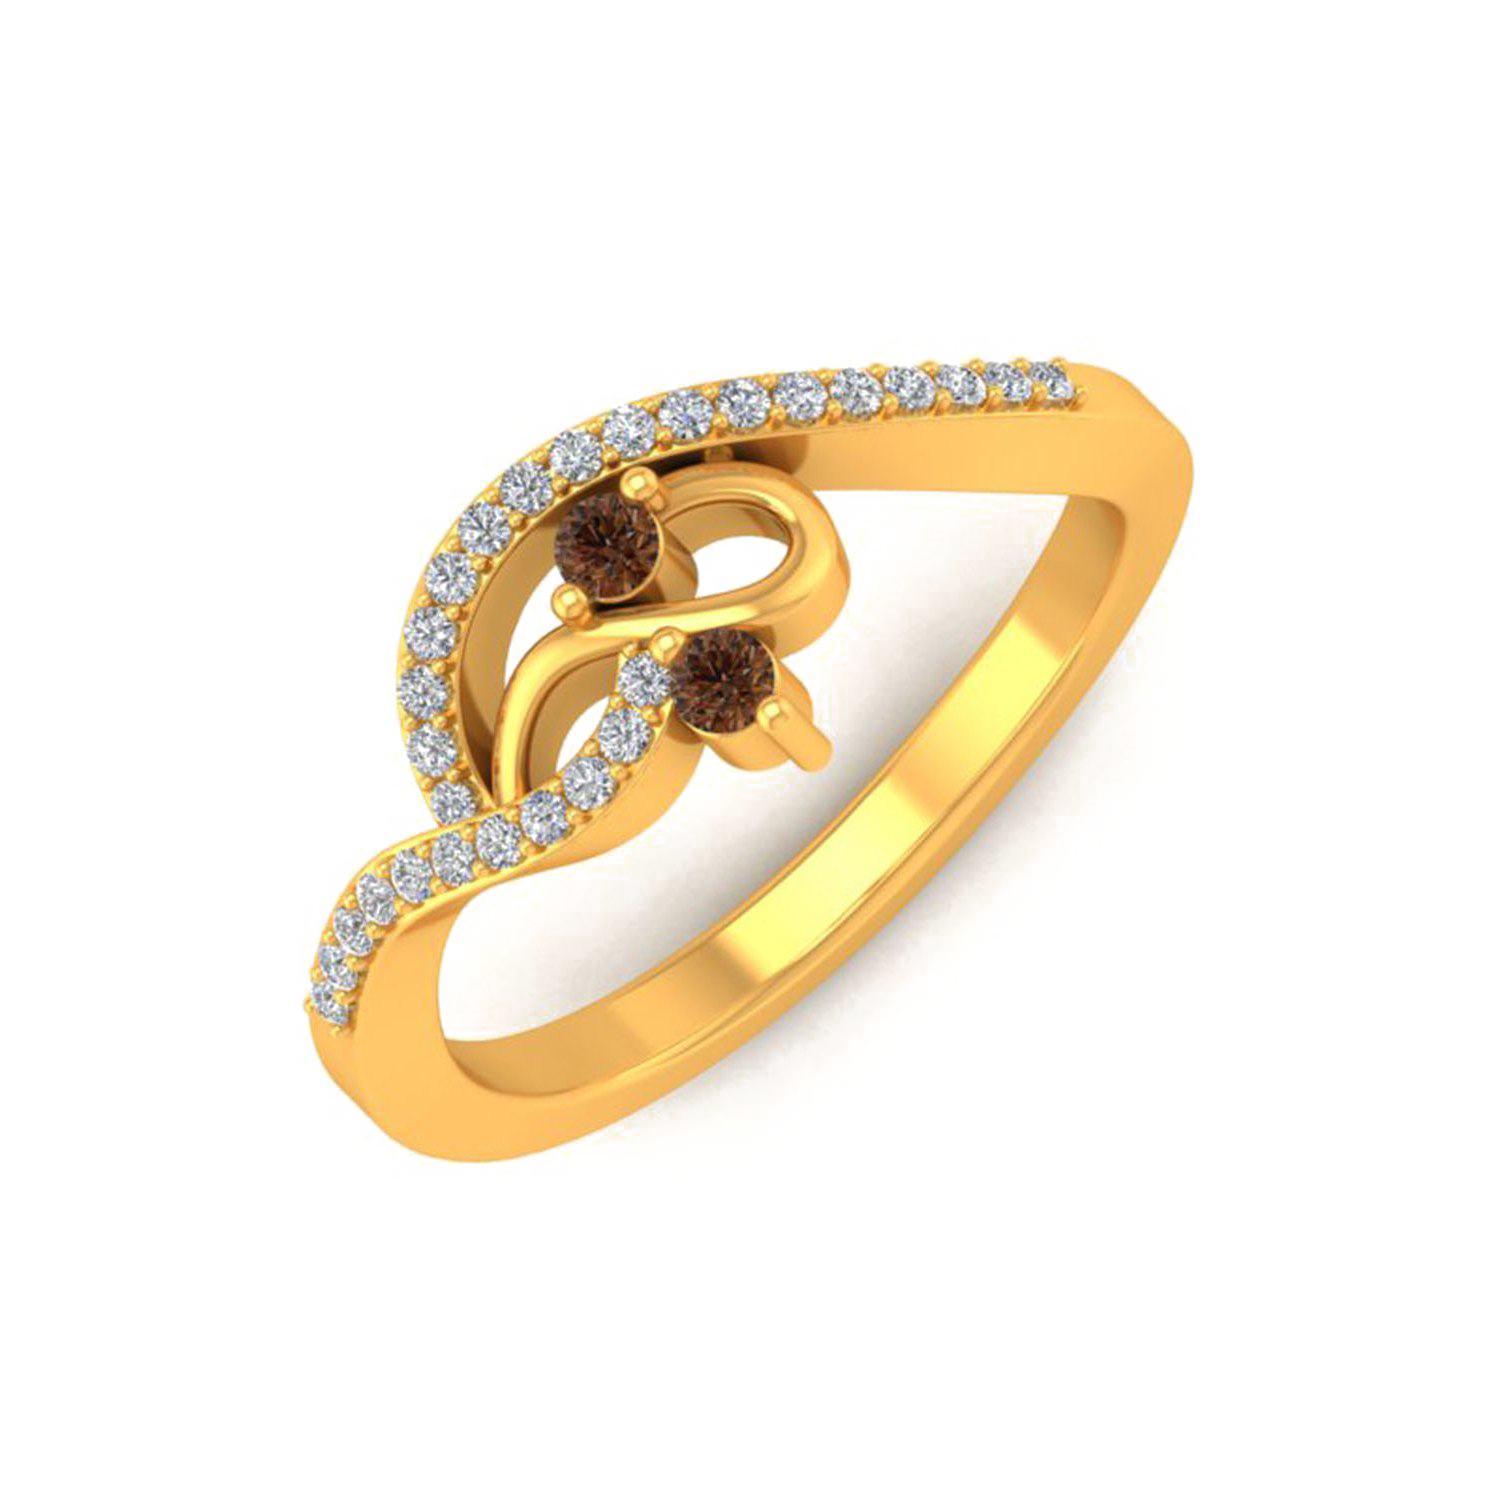 Jewellery Ring PNG Free Download